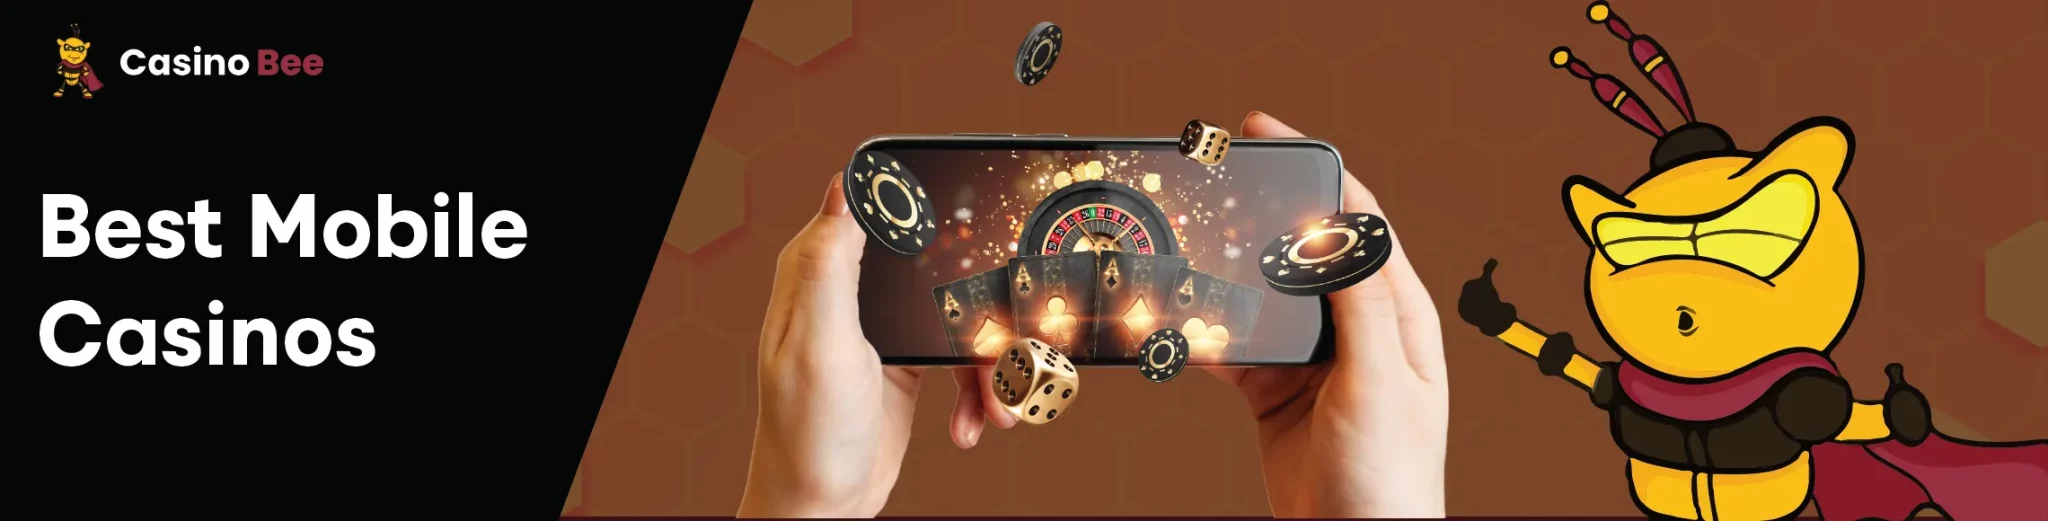 Unleash the Fun with Top Mobile Casinos
